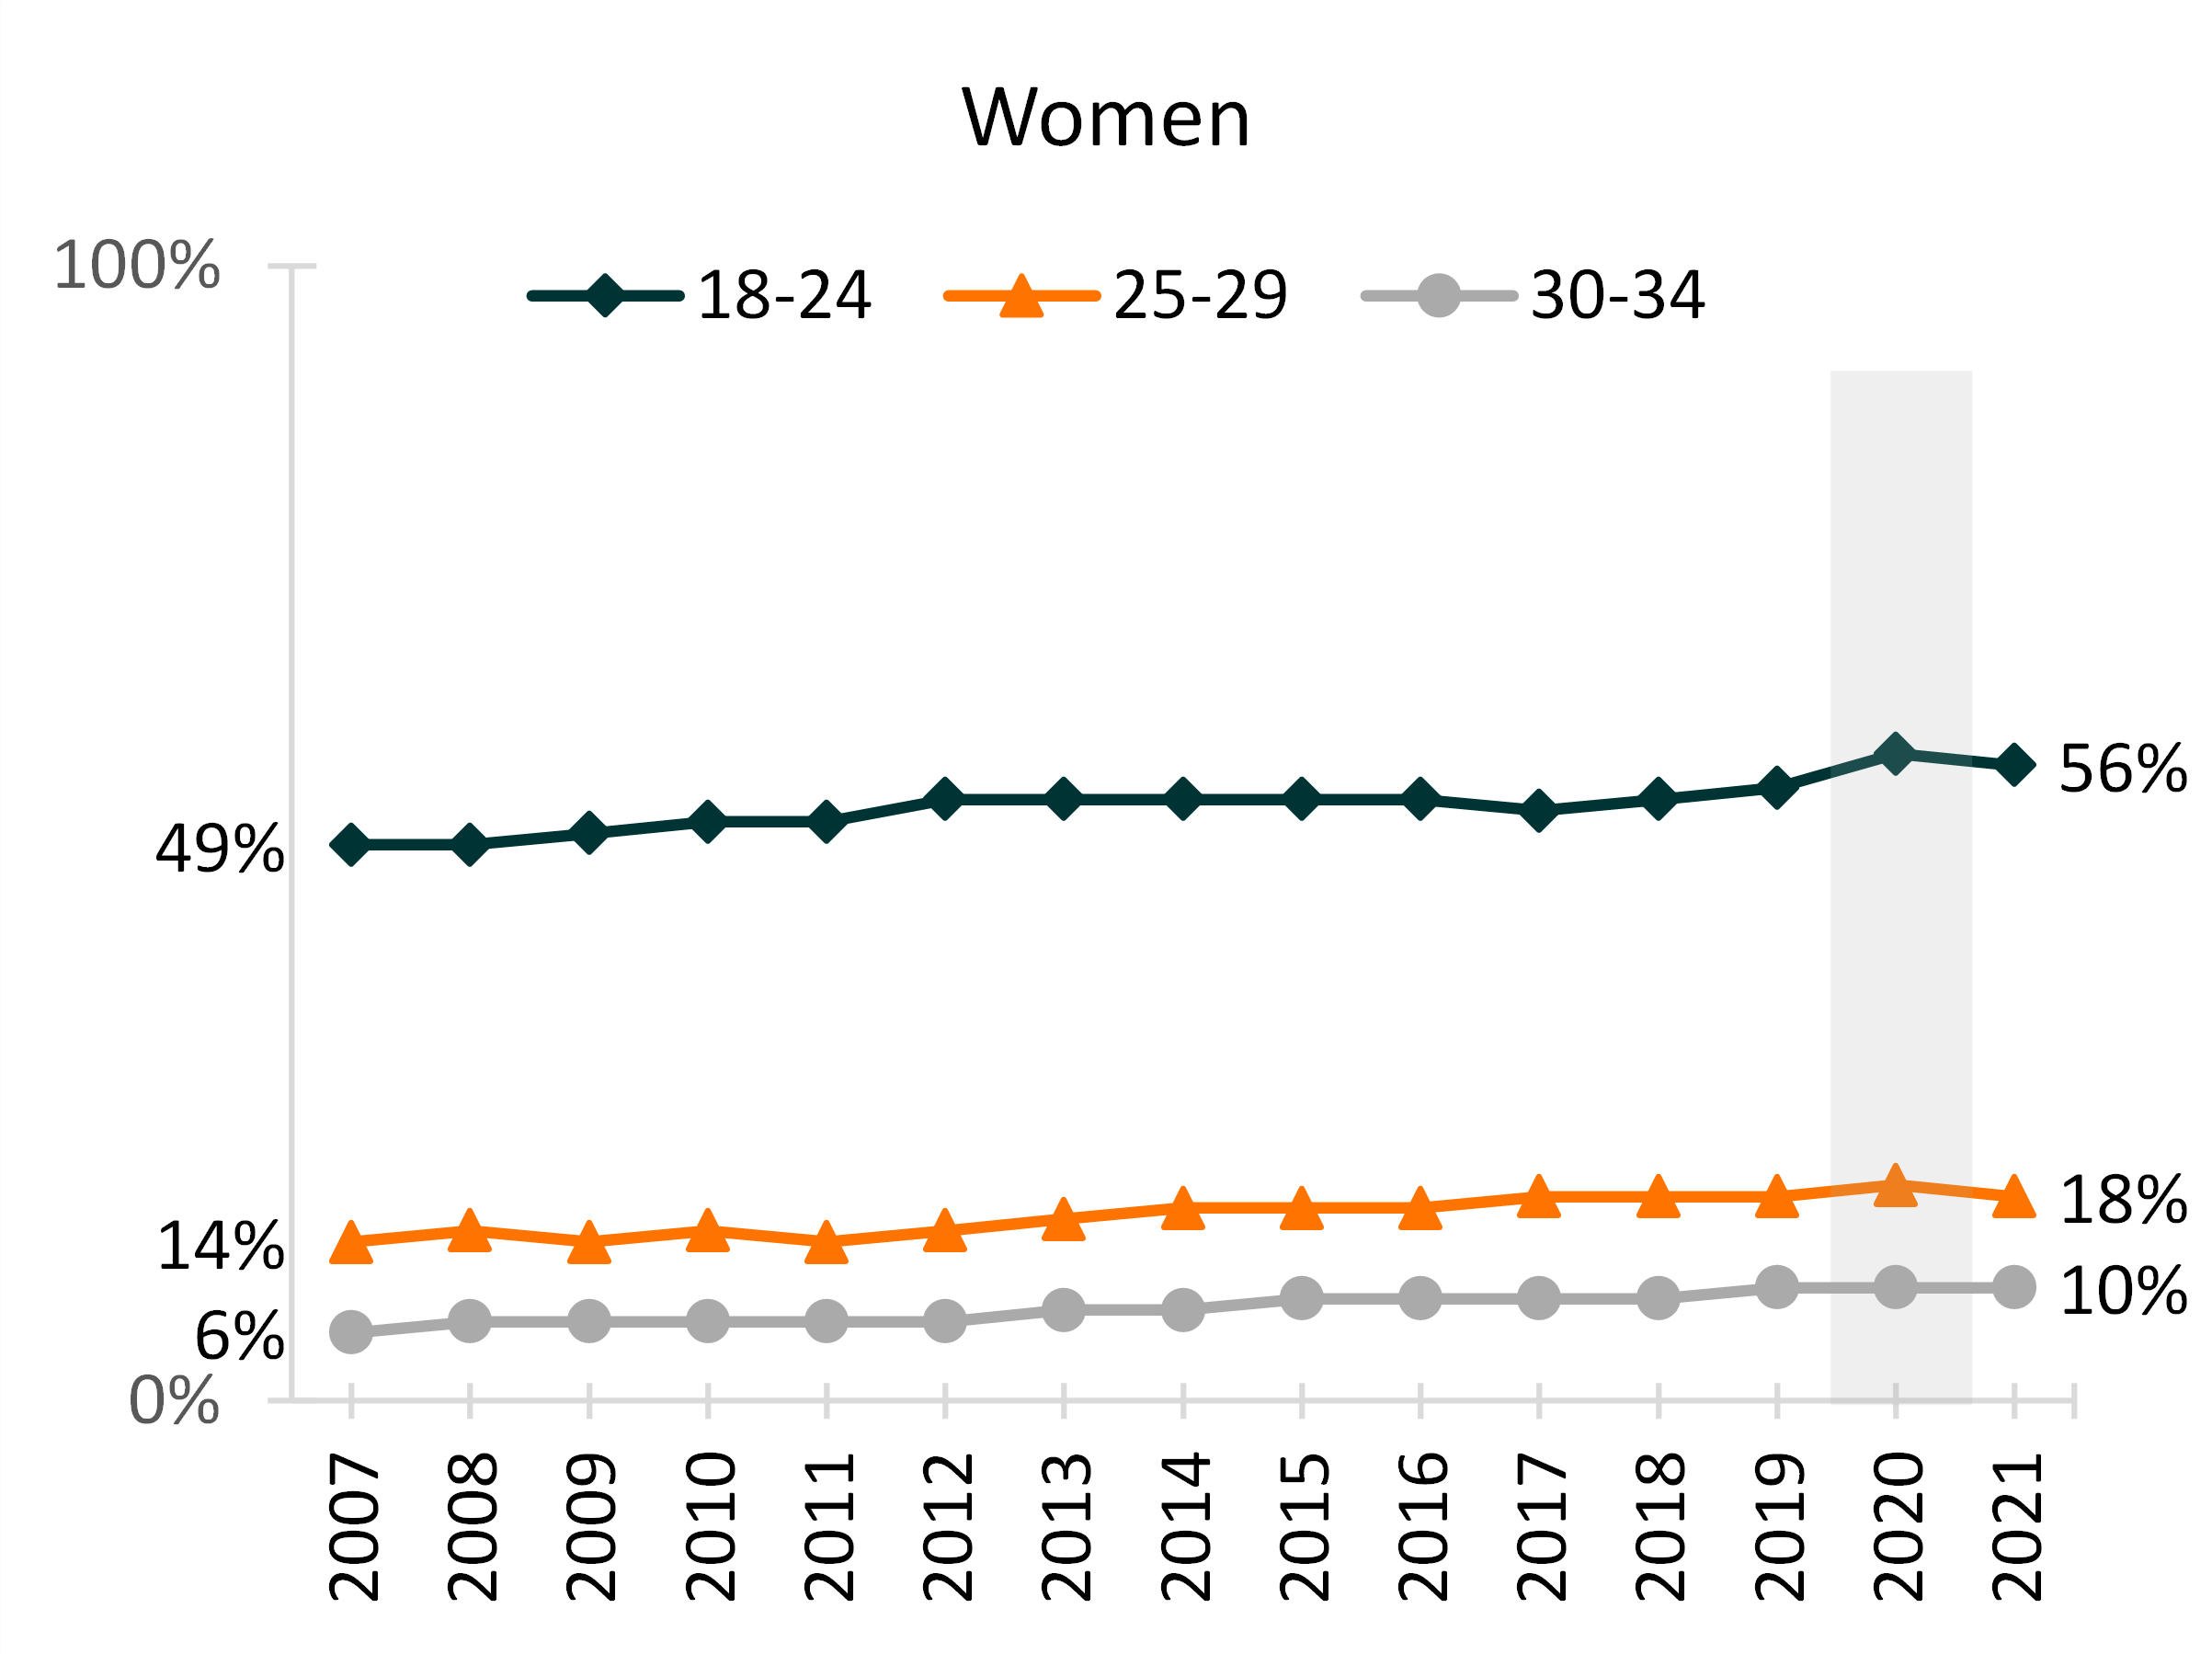 black-orange-gray-graph-showing-share-of-young-women-living-in-parental-home-by-gender-and-age-group-2007-2021